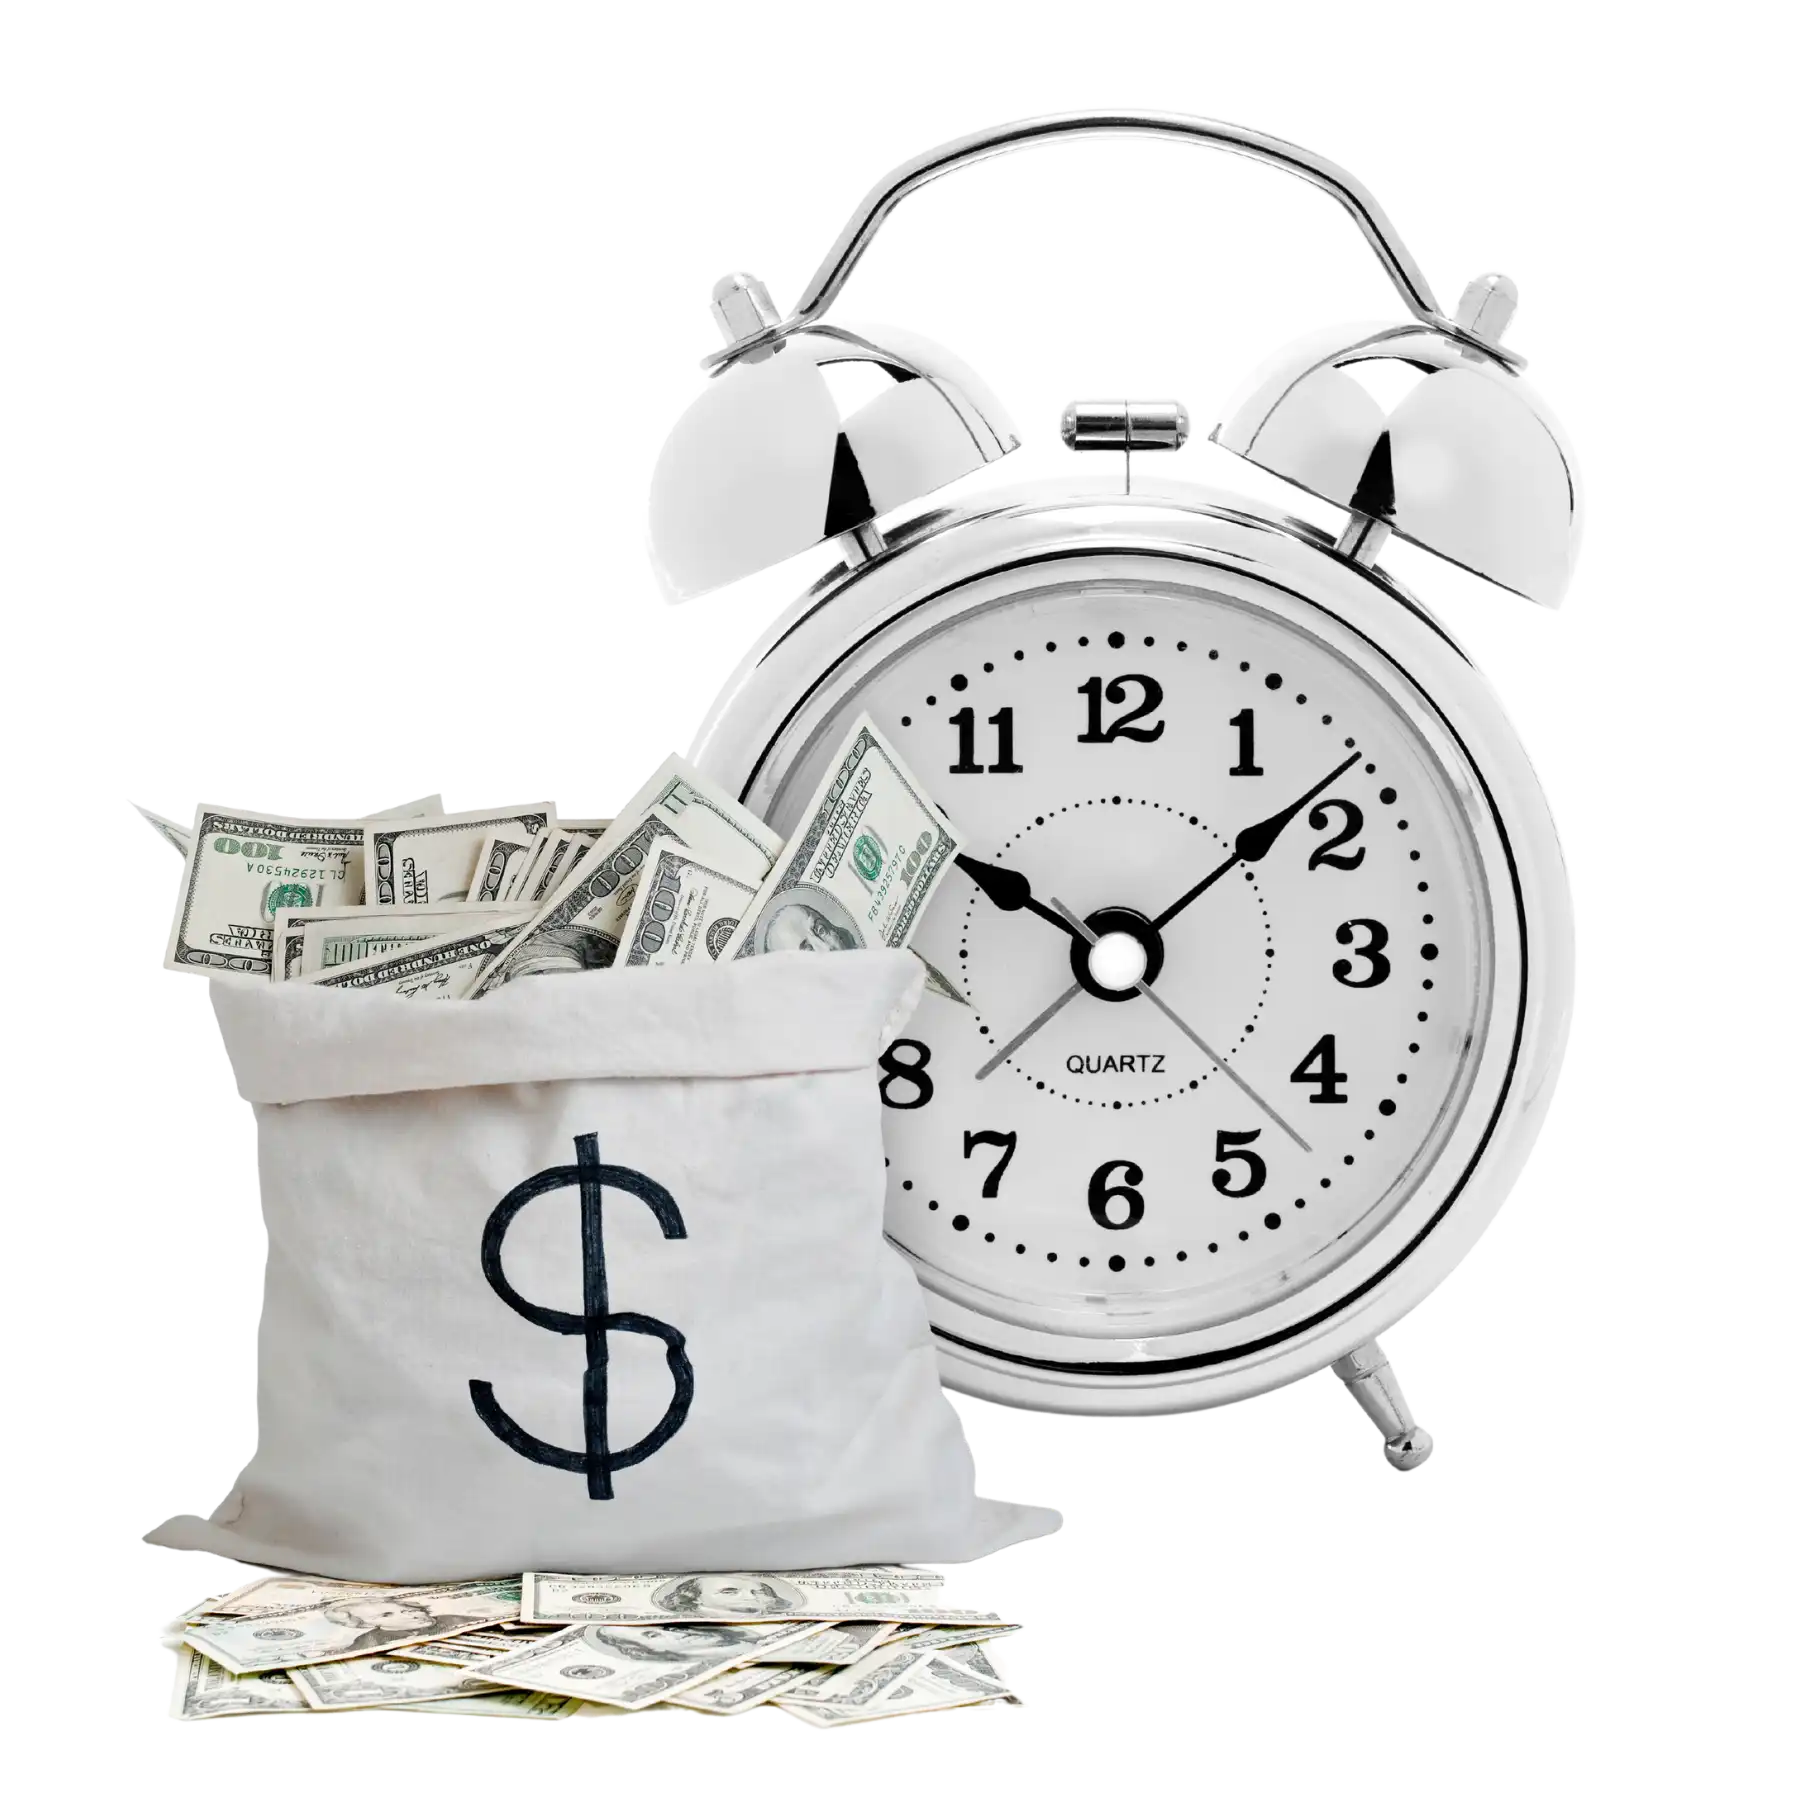 A bag of money and alarm clock